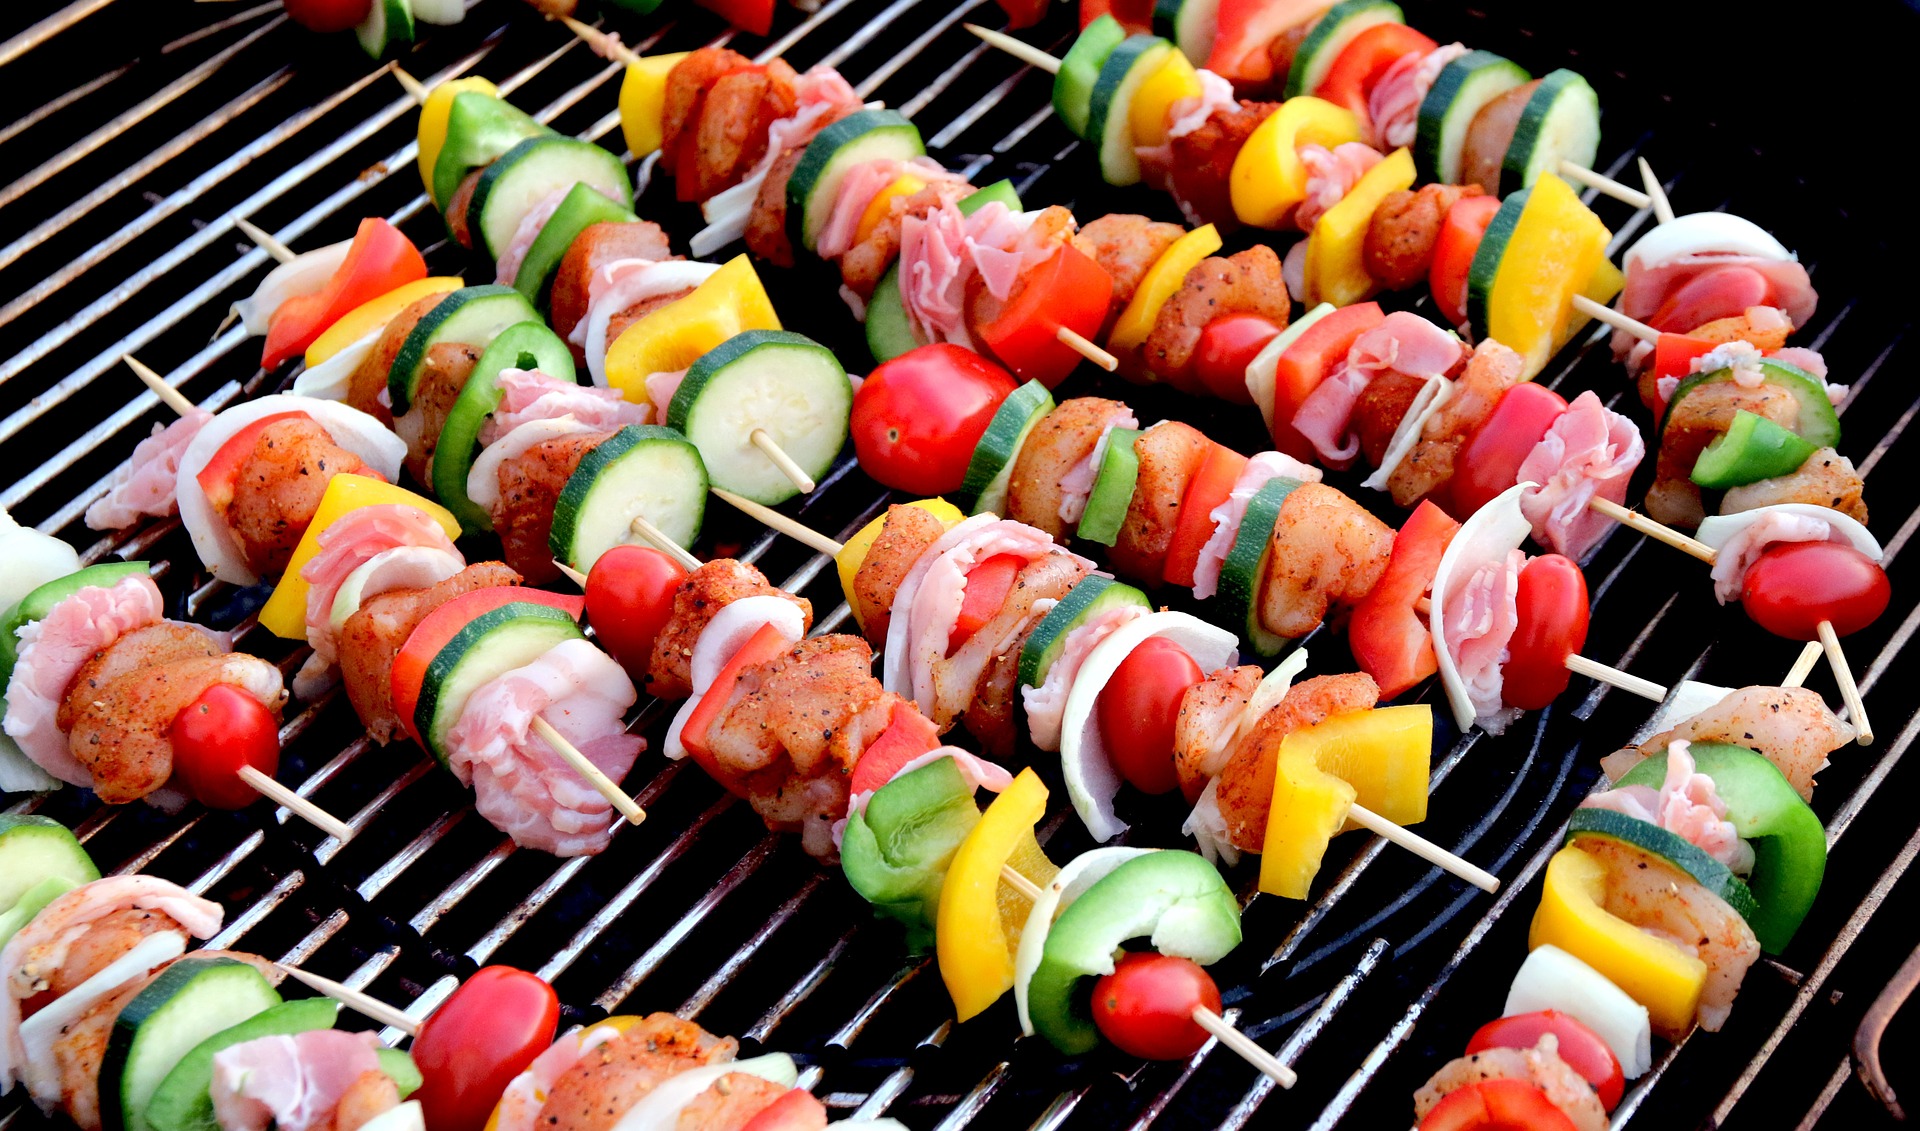 Shopkick | Barbecue basics: setting up for BBQ grilling success